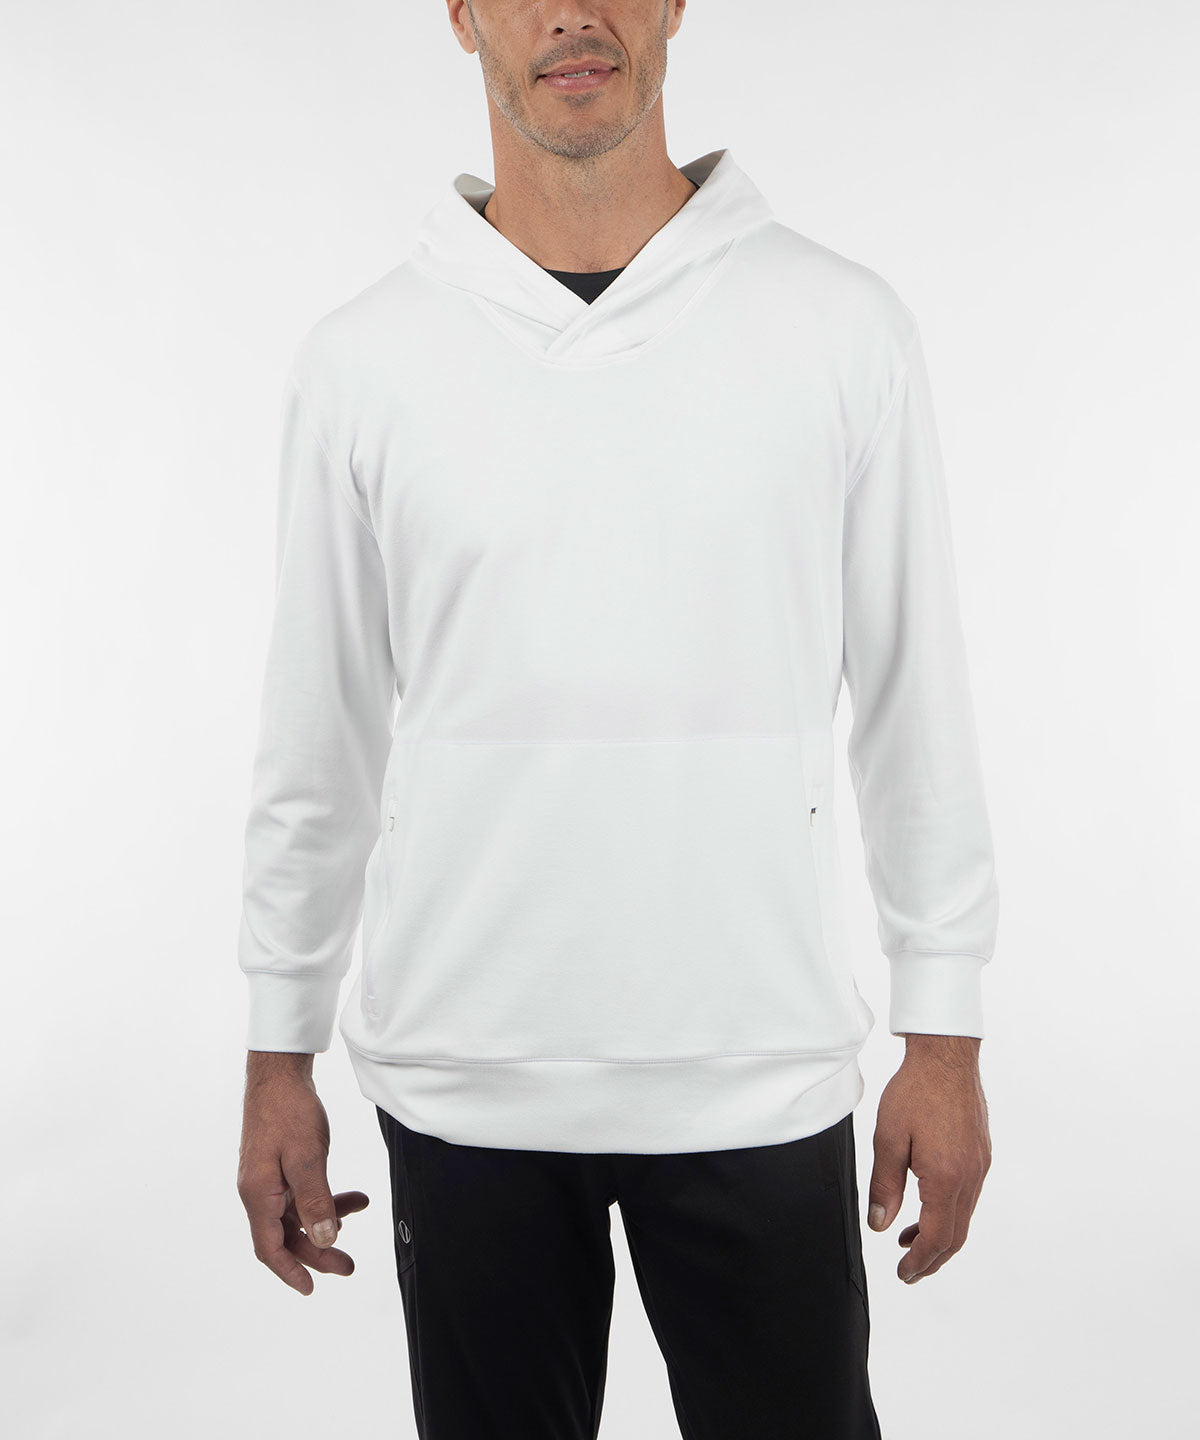 Men's Performance Pullovers - Sunice Sports - Canada